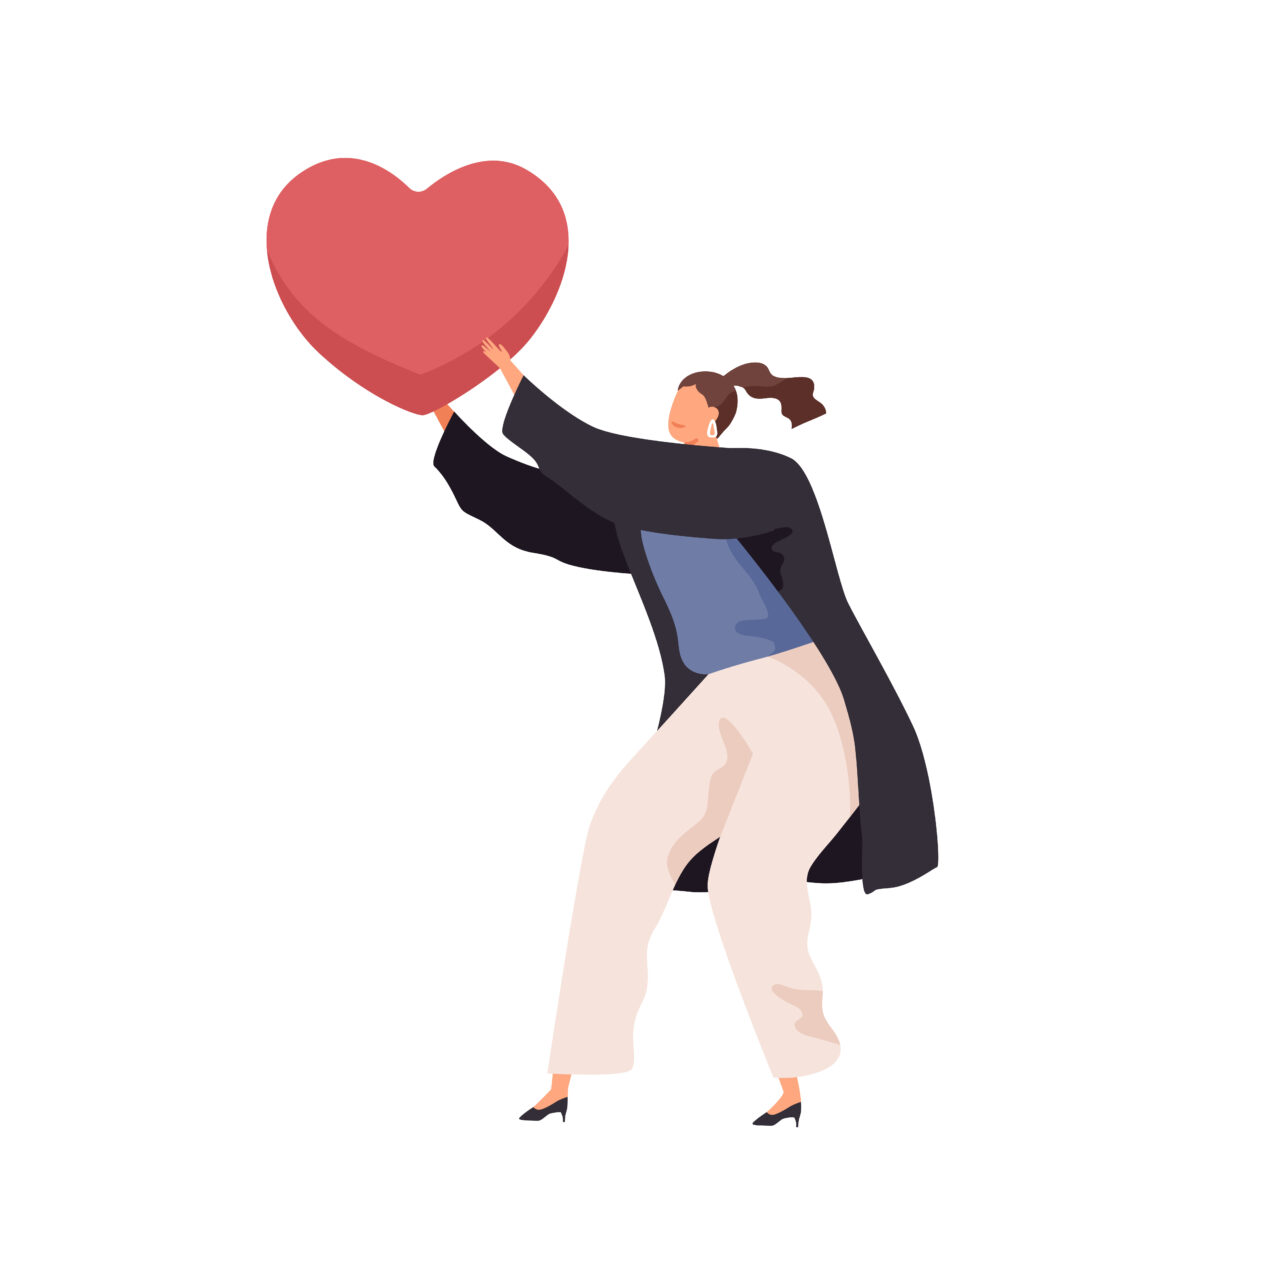 A vector illustration of a woman holding an emoji heart.